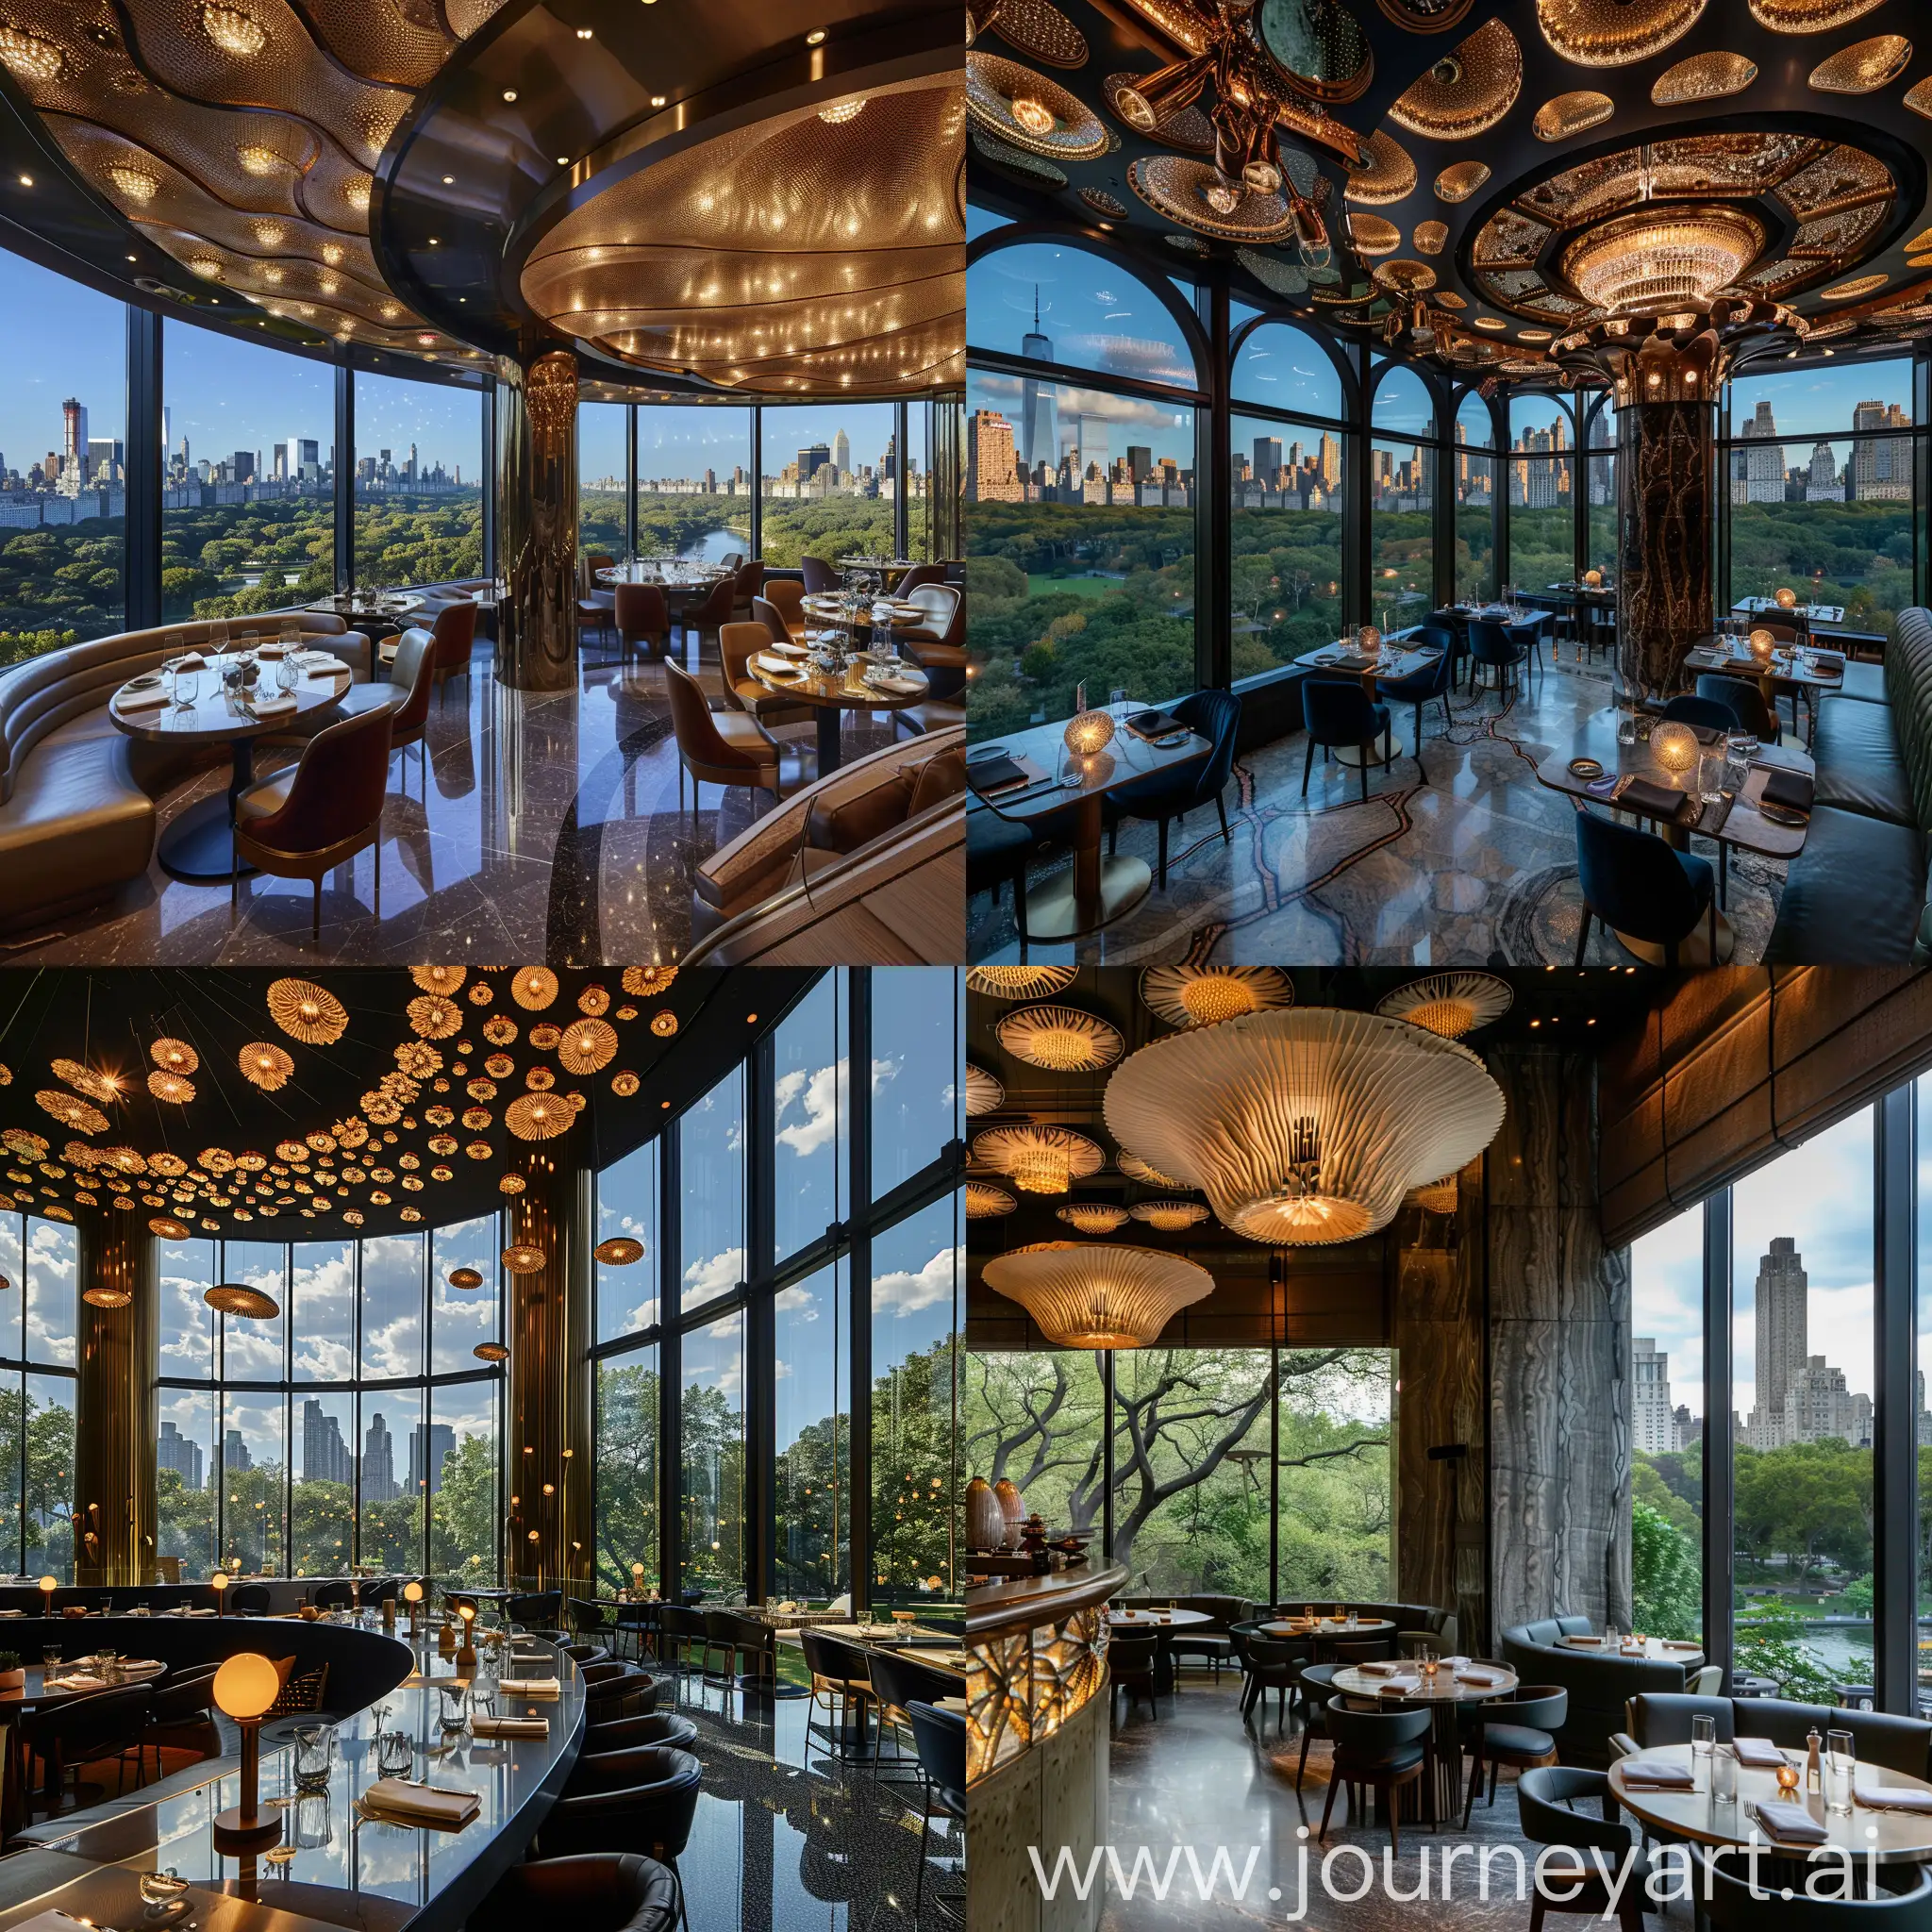 neo-cosmic style restaurant interior, views of central park out the floor to celling windows, mushroom lamella inspired lights in the celling